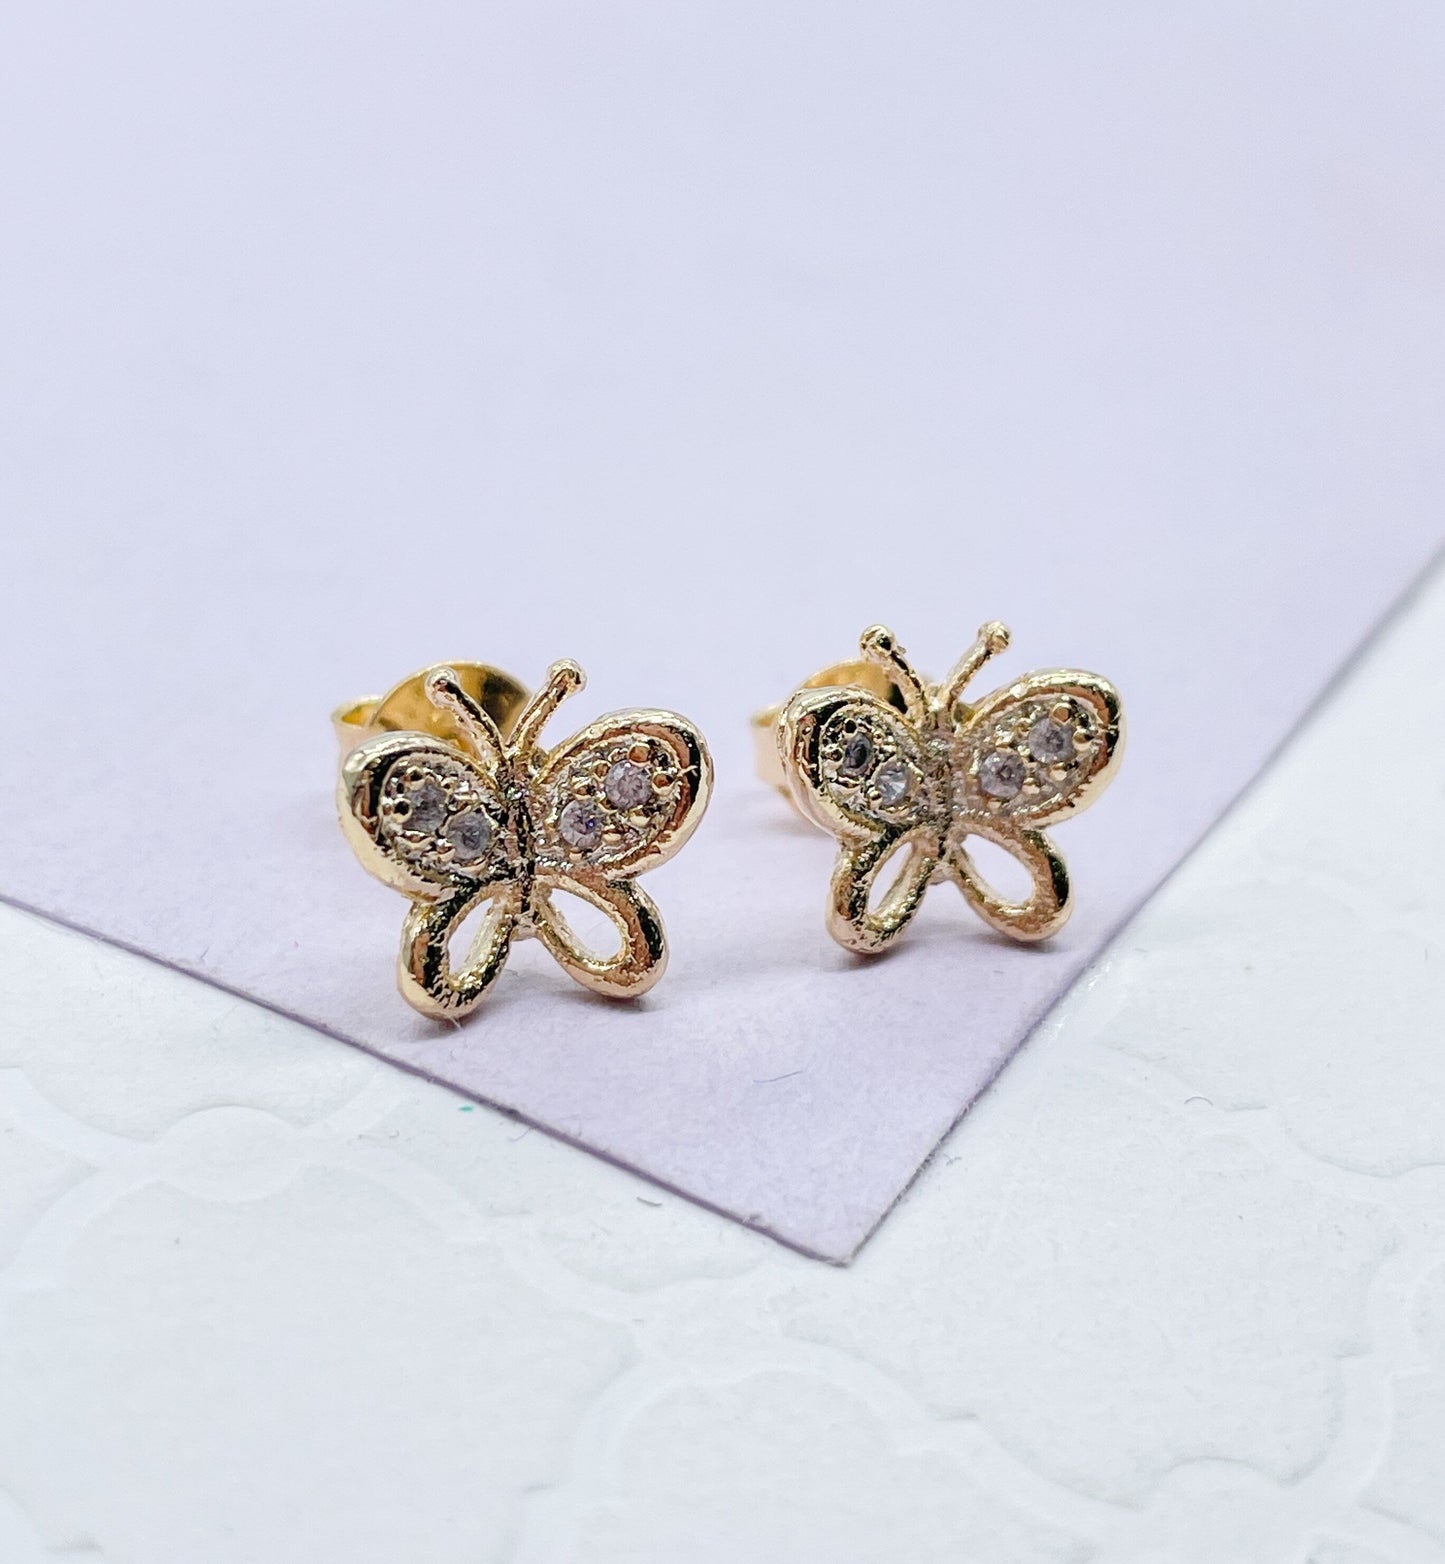 18k Gold Filled Dainty Butterly Earring With CZ Top wings